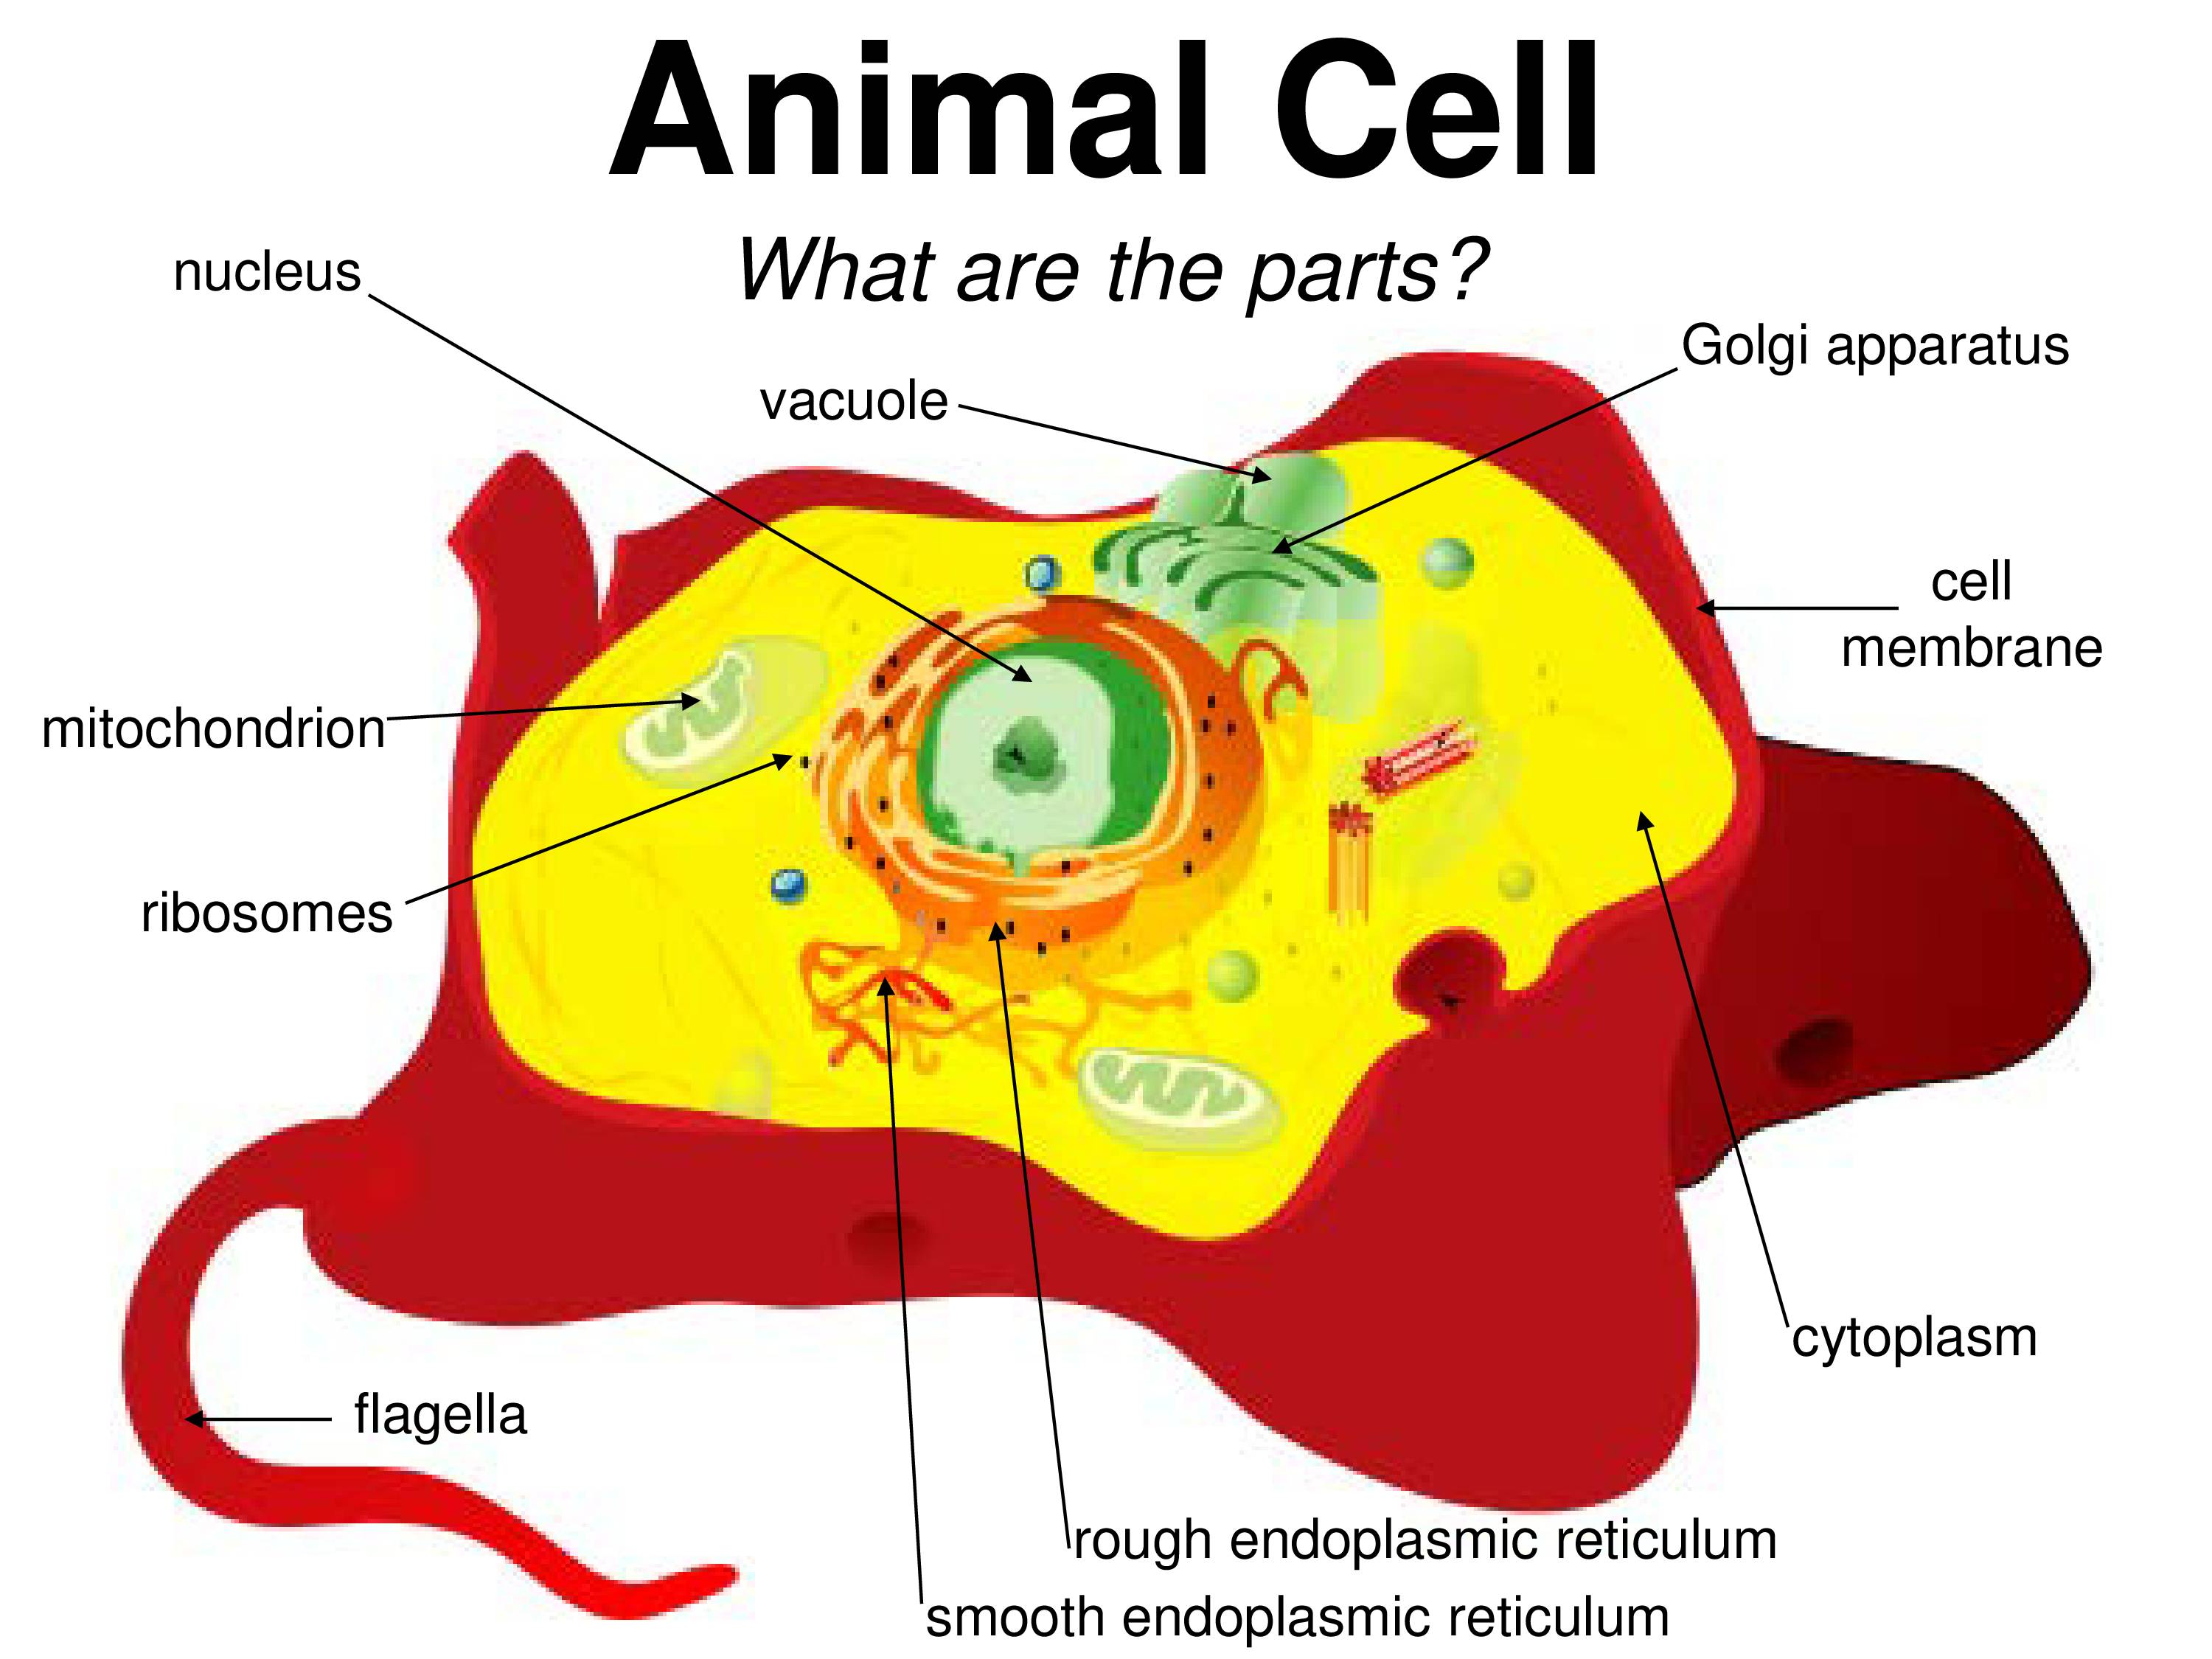 What does the golgi apparatus do in an animal cell Plant And Animal Cell Notes Notes